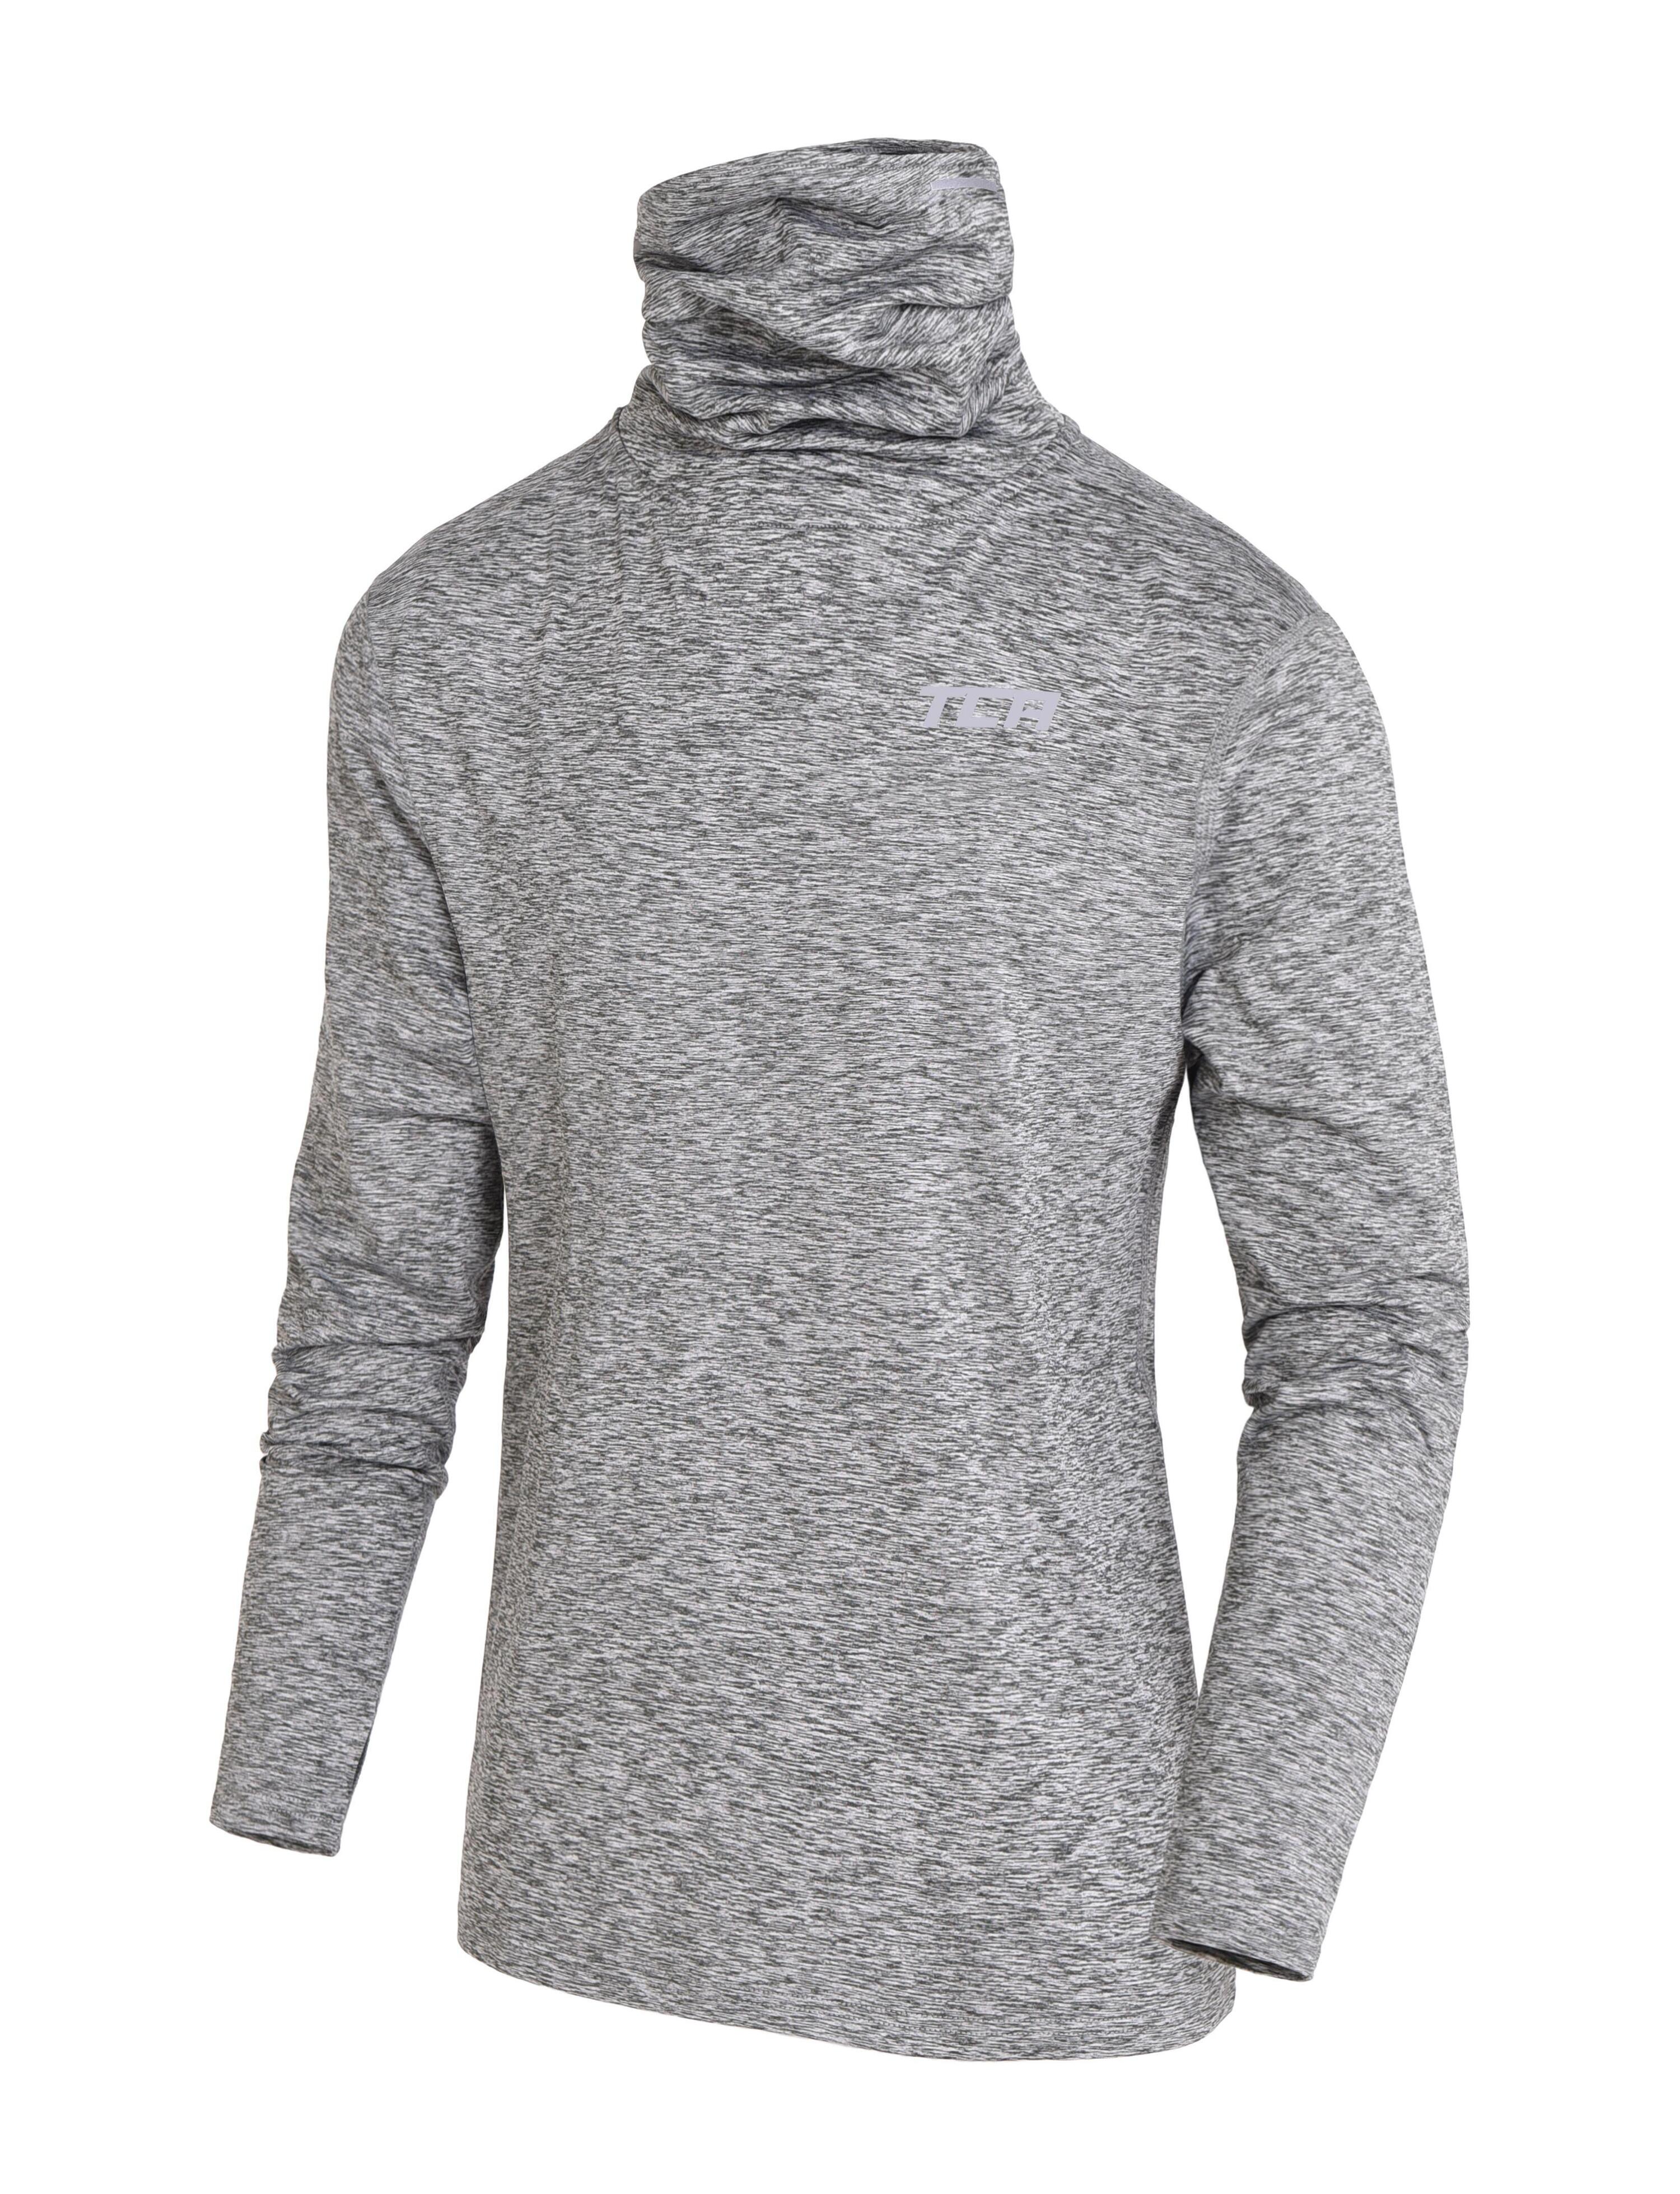 TCA Boy’s Thermal Funnel Neck Top - Quiet Shade Marl